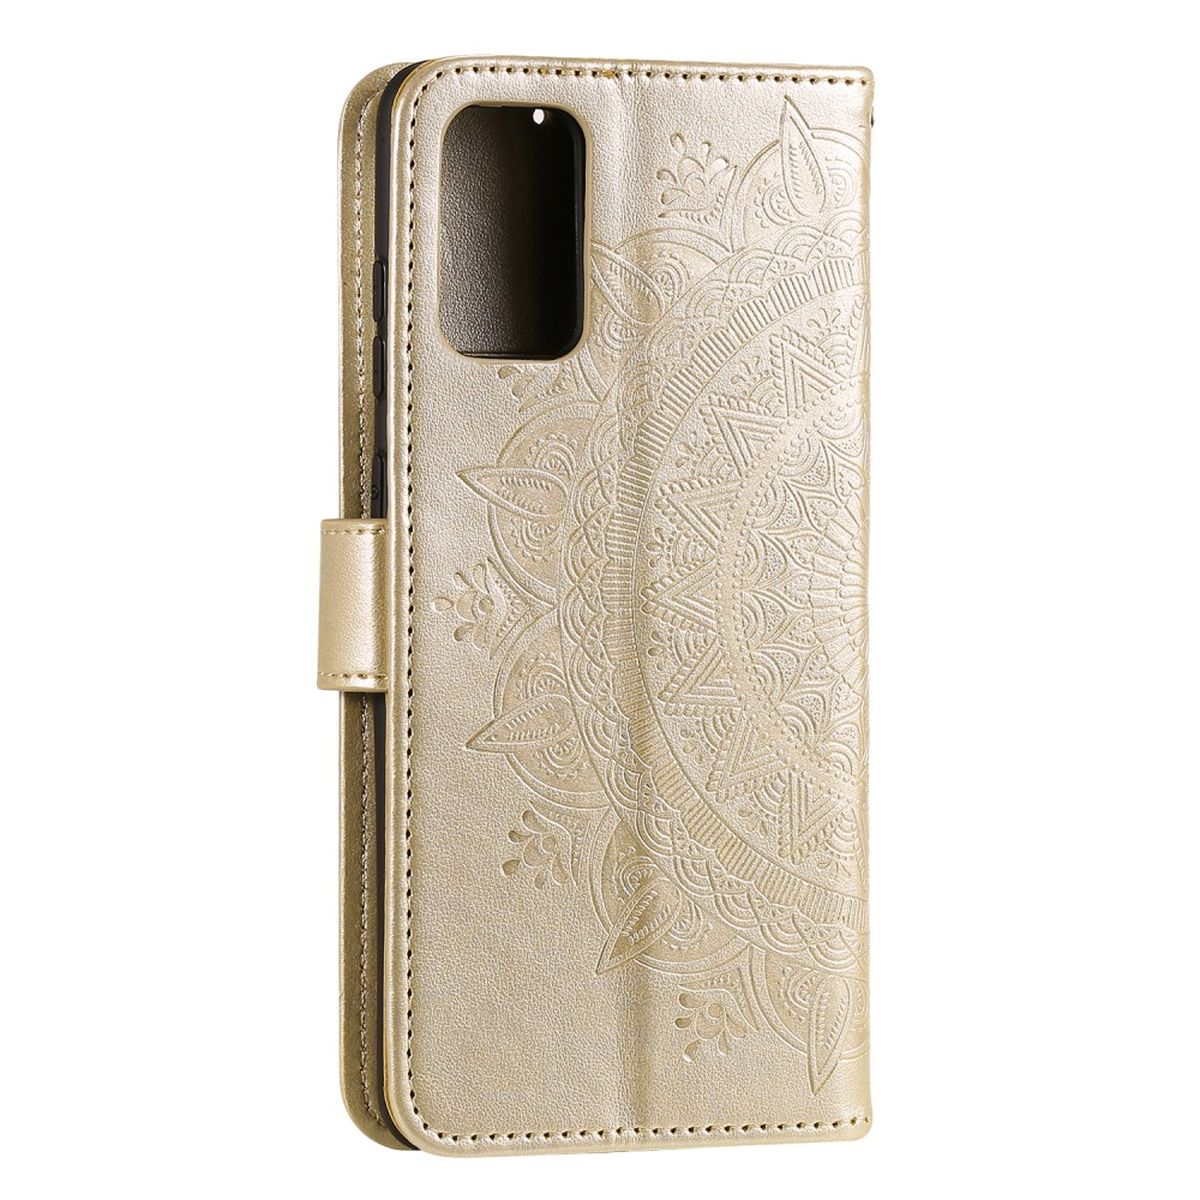 Mandala mit 5G, Samsung, Galaxy Bookcover, COVERKINGZ Gold Muster, Klapphülle A33